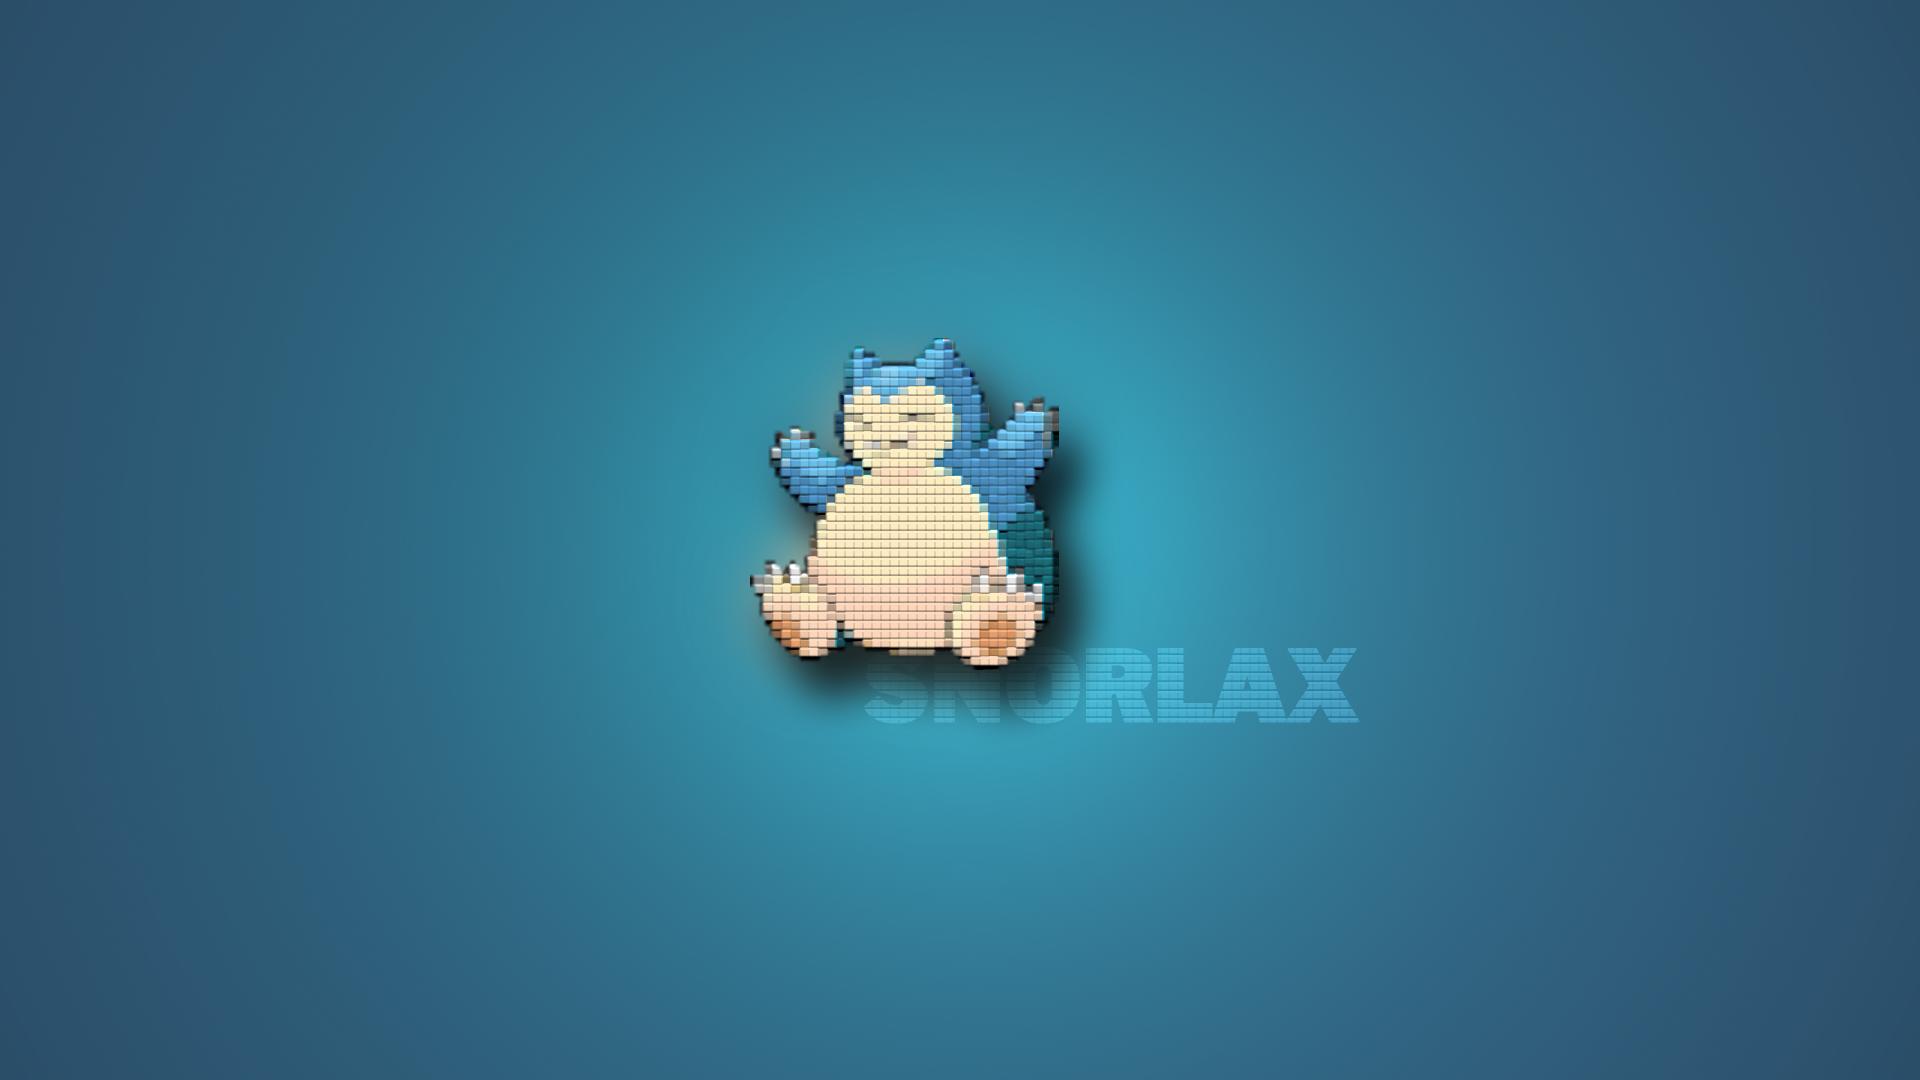 Wallpaper For Snorlax